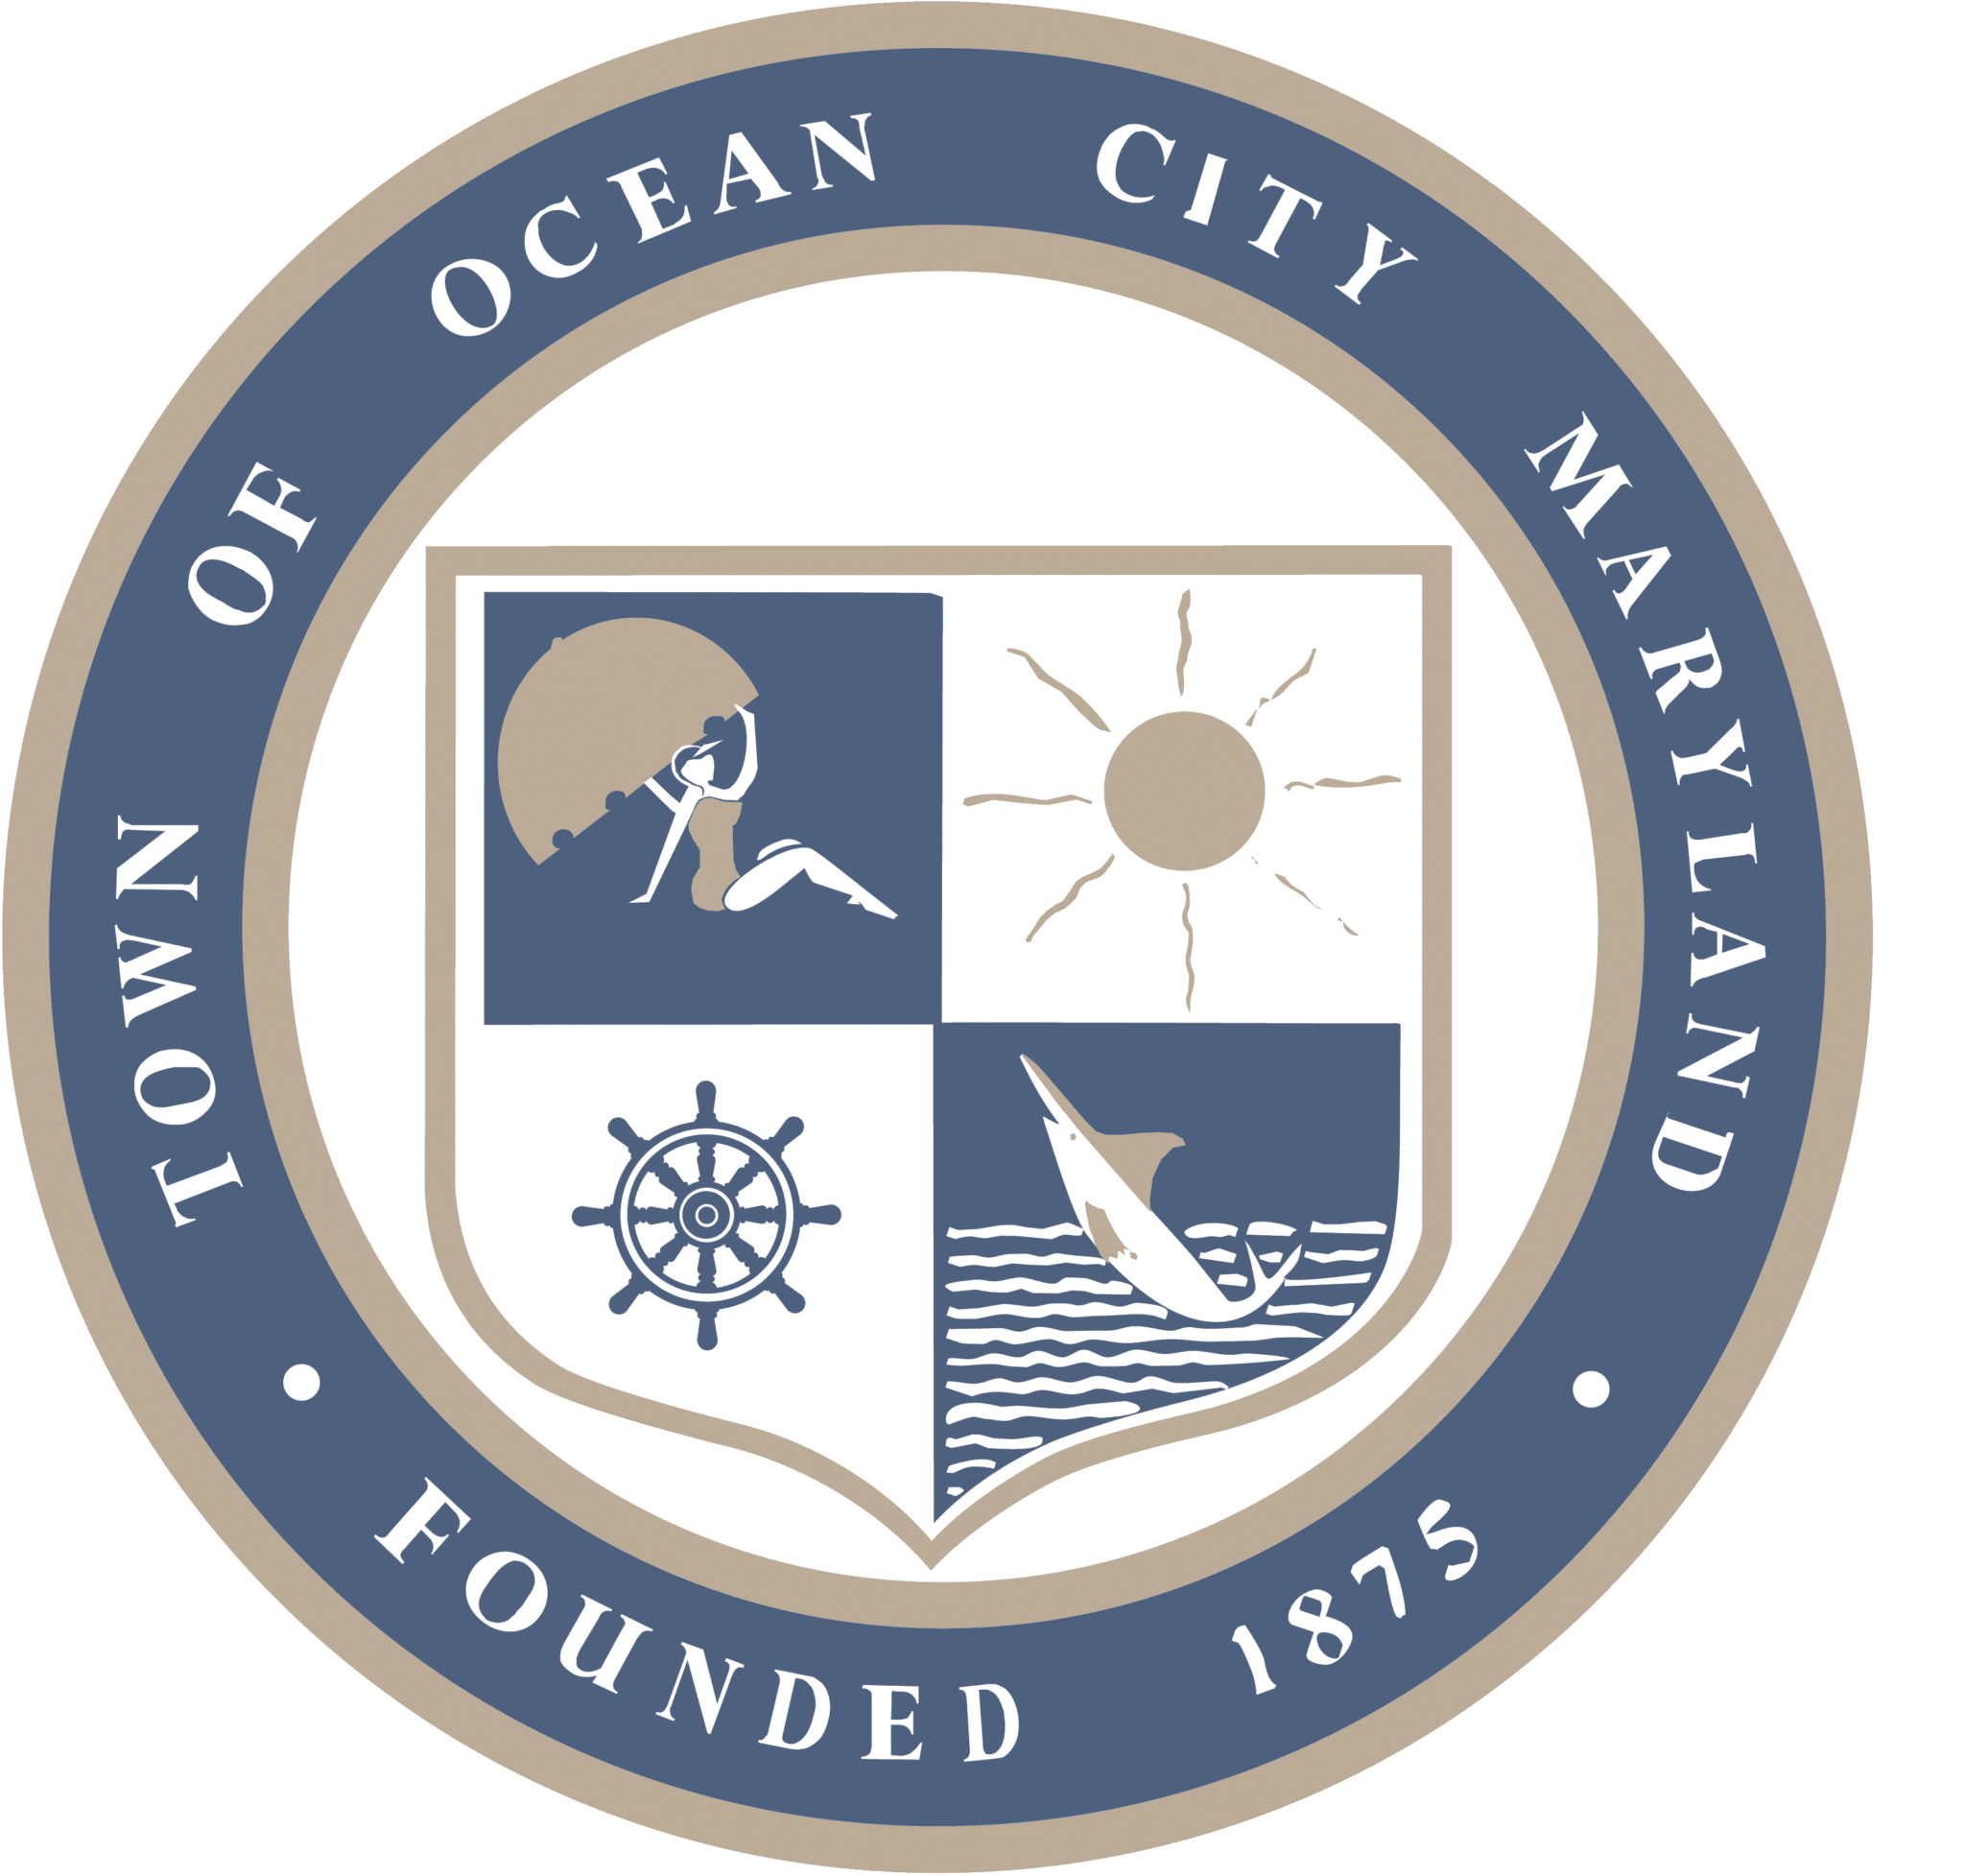 The Town of Ocean City, Maryland is currently hiring and in the process of designing a new logo.